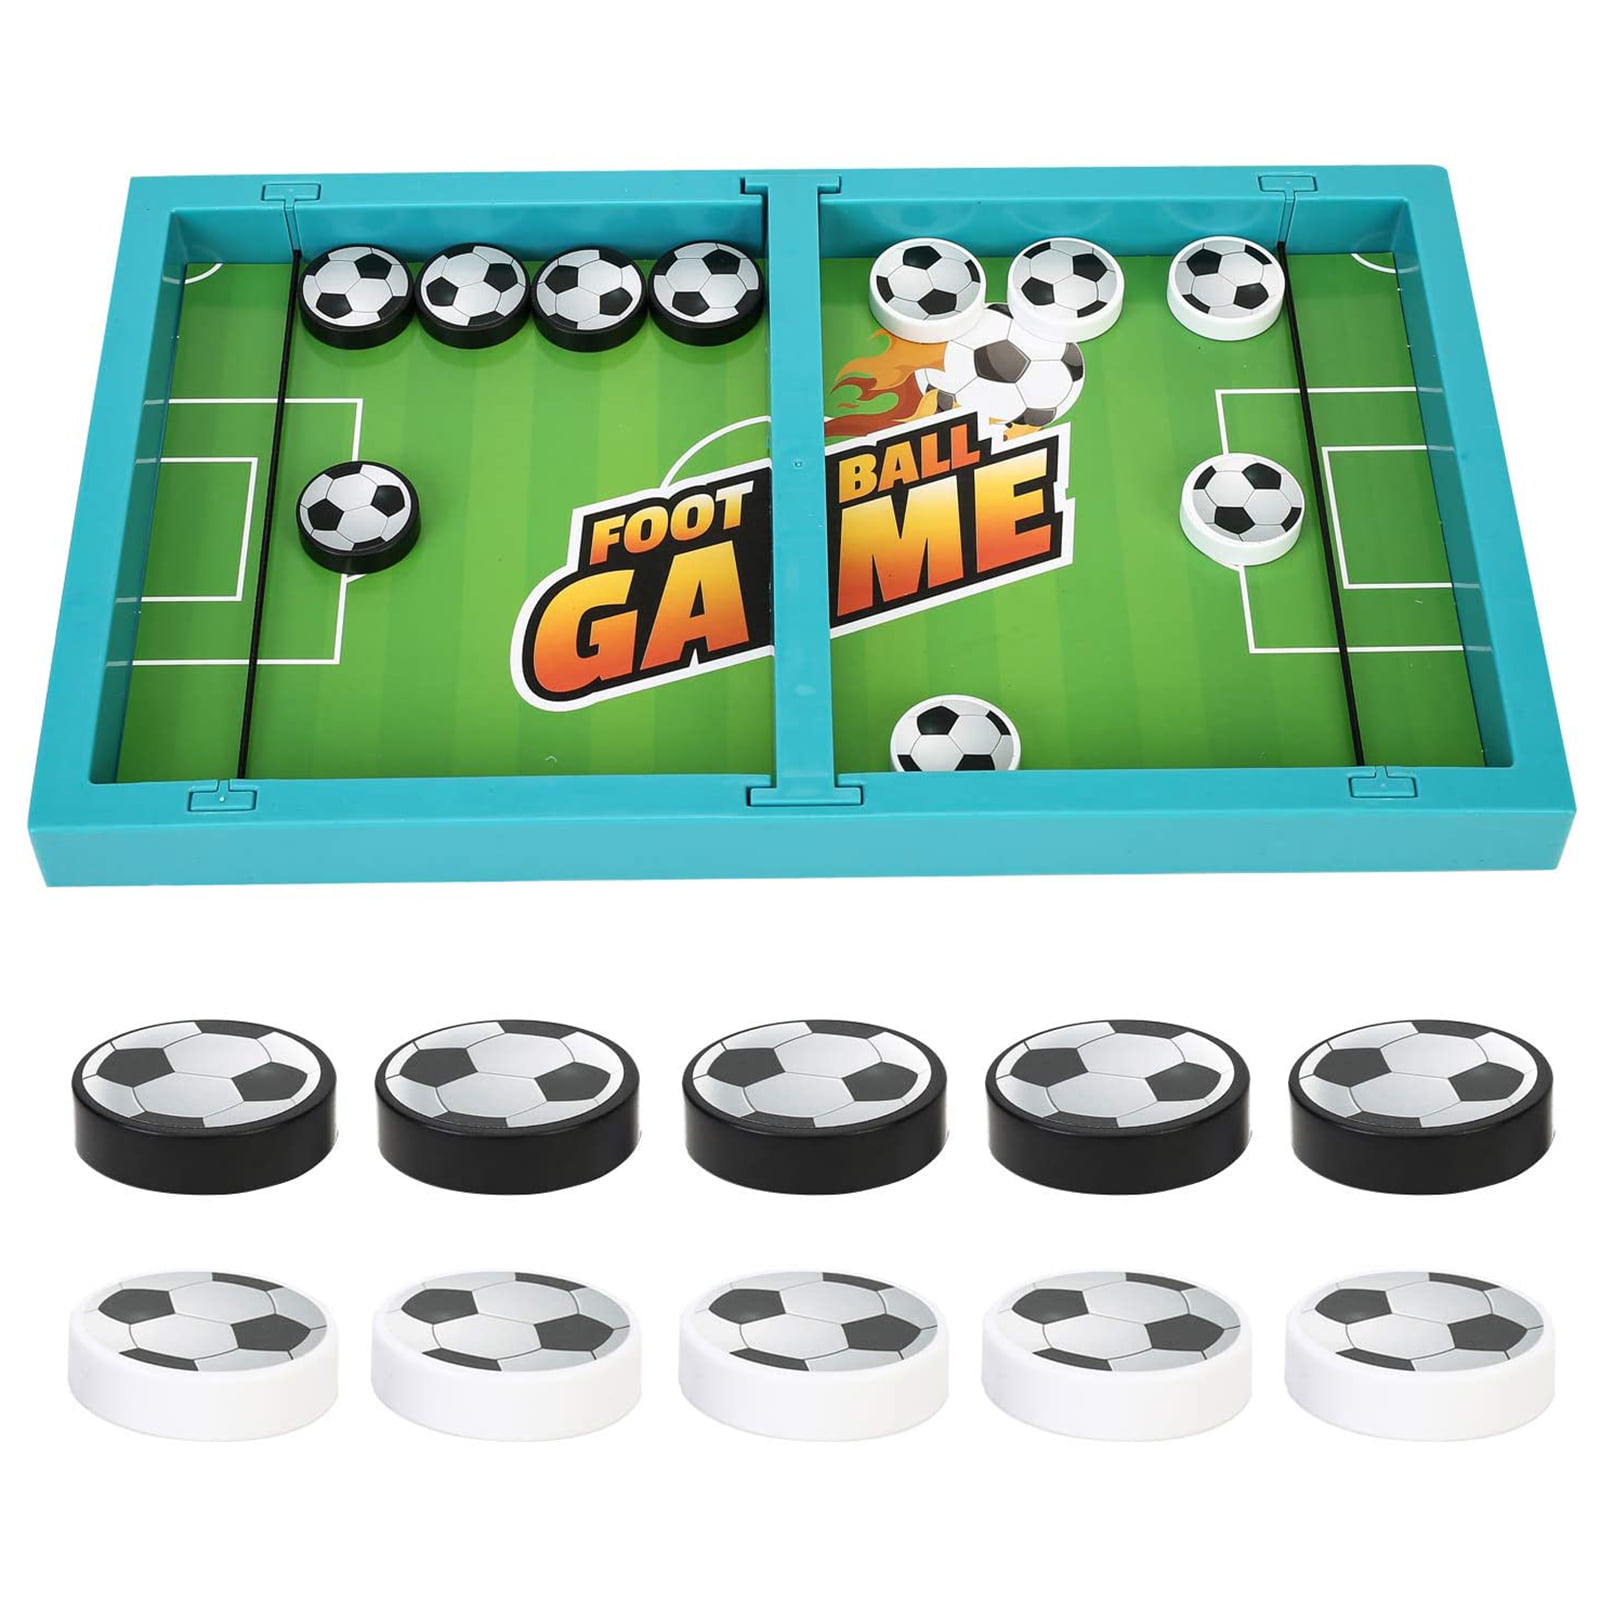 Great Table or Travel Game for Hours of Fun! Details about   Football Travel Game 